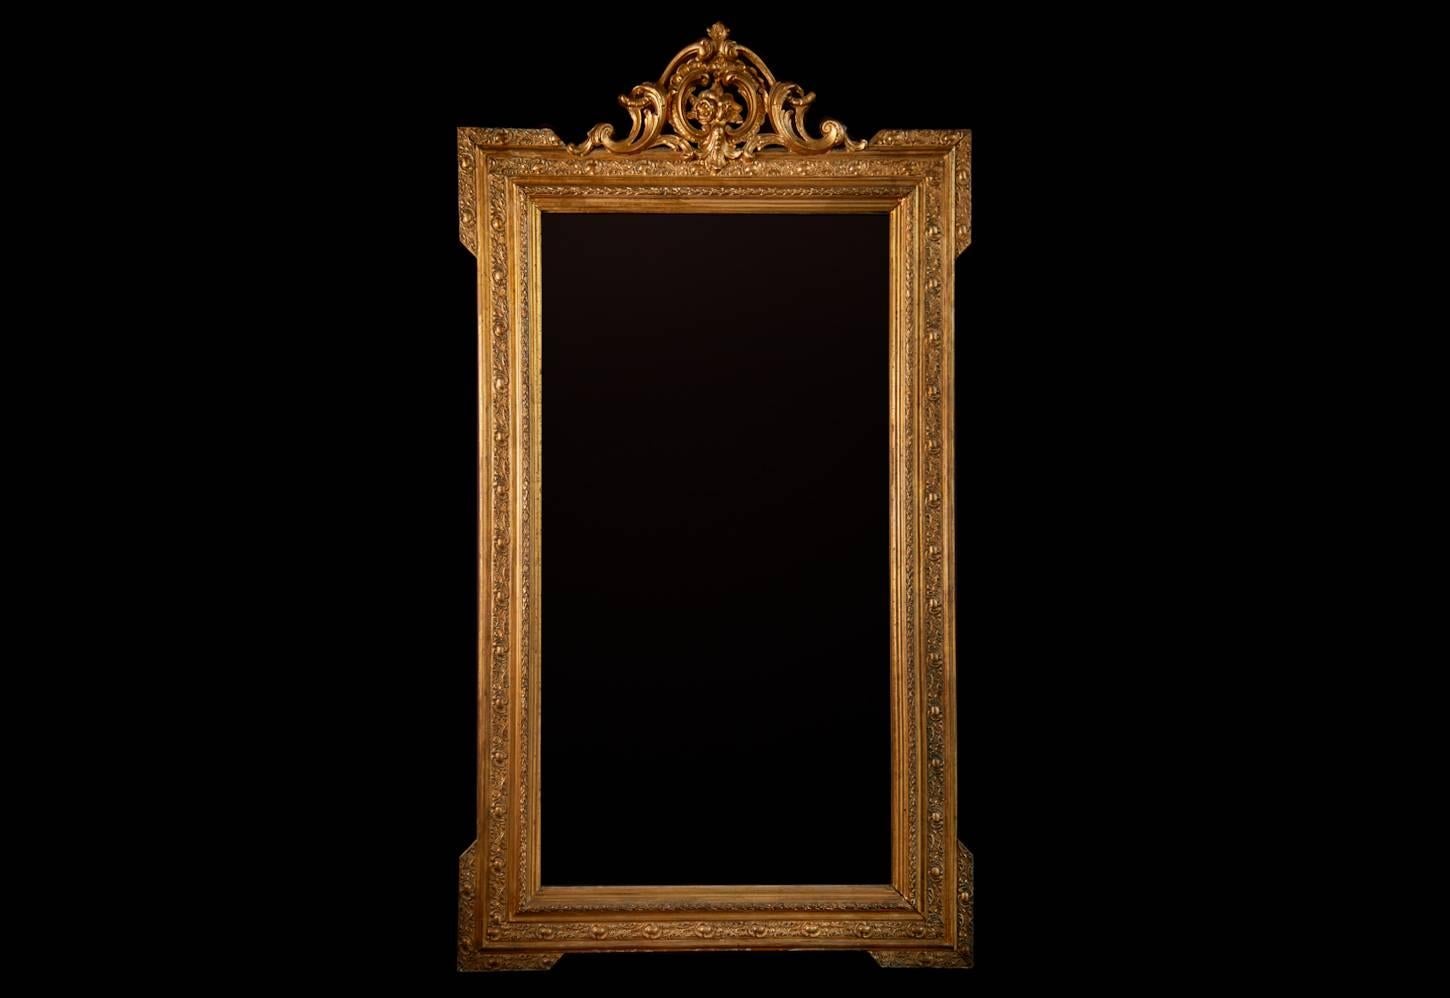 Wonderfully decorative, ornate and grand scale Neo-classical Napoleon III gilt wall mirror. Crested with ribbon and foliate gesso work, crest surmounting extensively carved relief moulded frame enclosing original bevel plate mirror. 